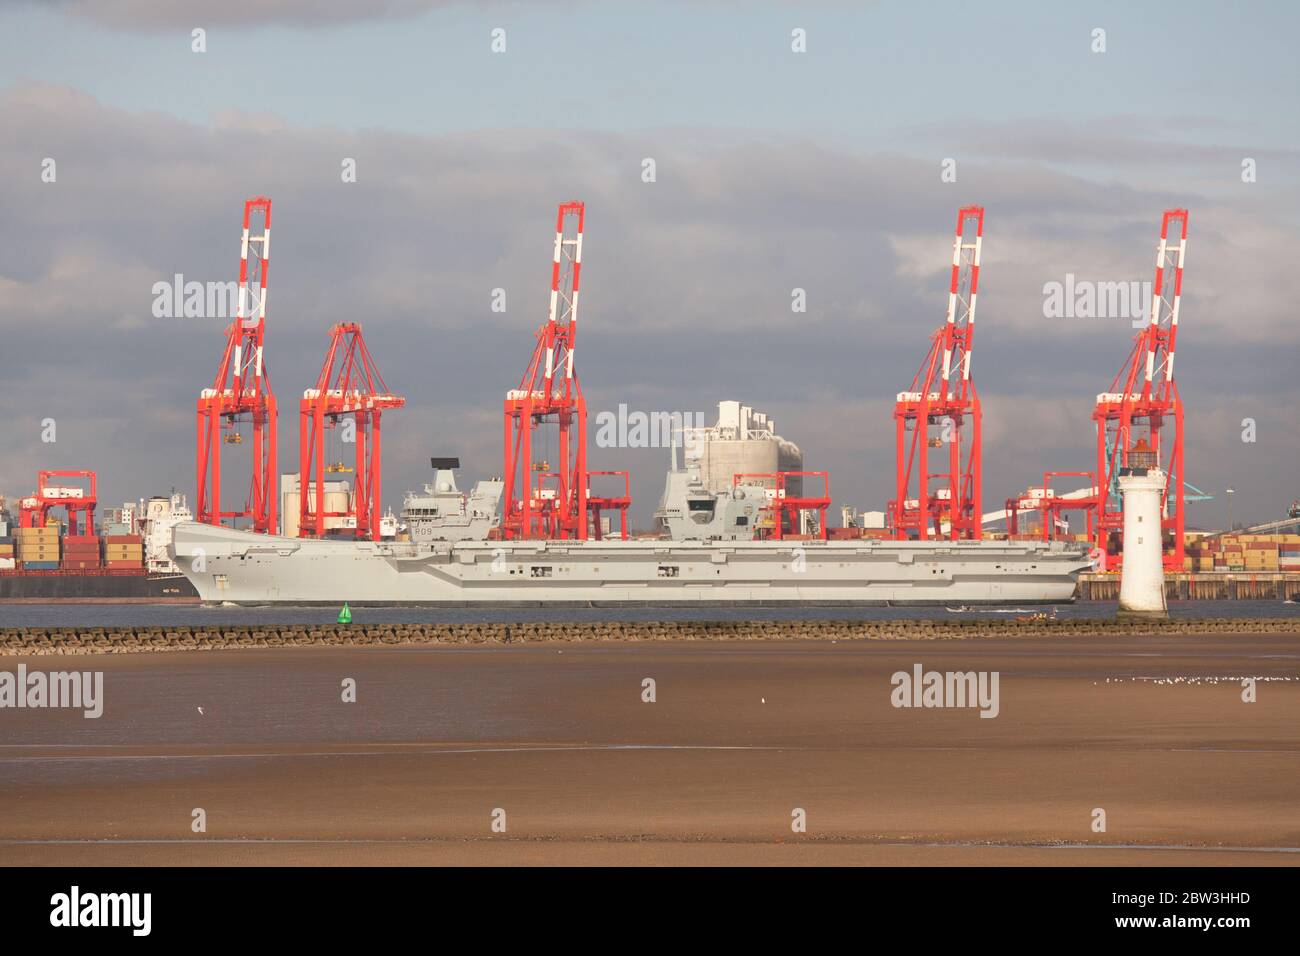 City of Liverpool, England. HMS Queen Elizabeth transiting past the red cranes of the Liverpool Container Terminal, on the River Mersey. Stock Photo